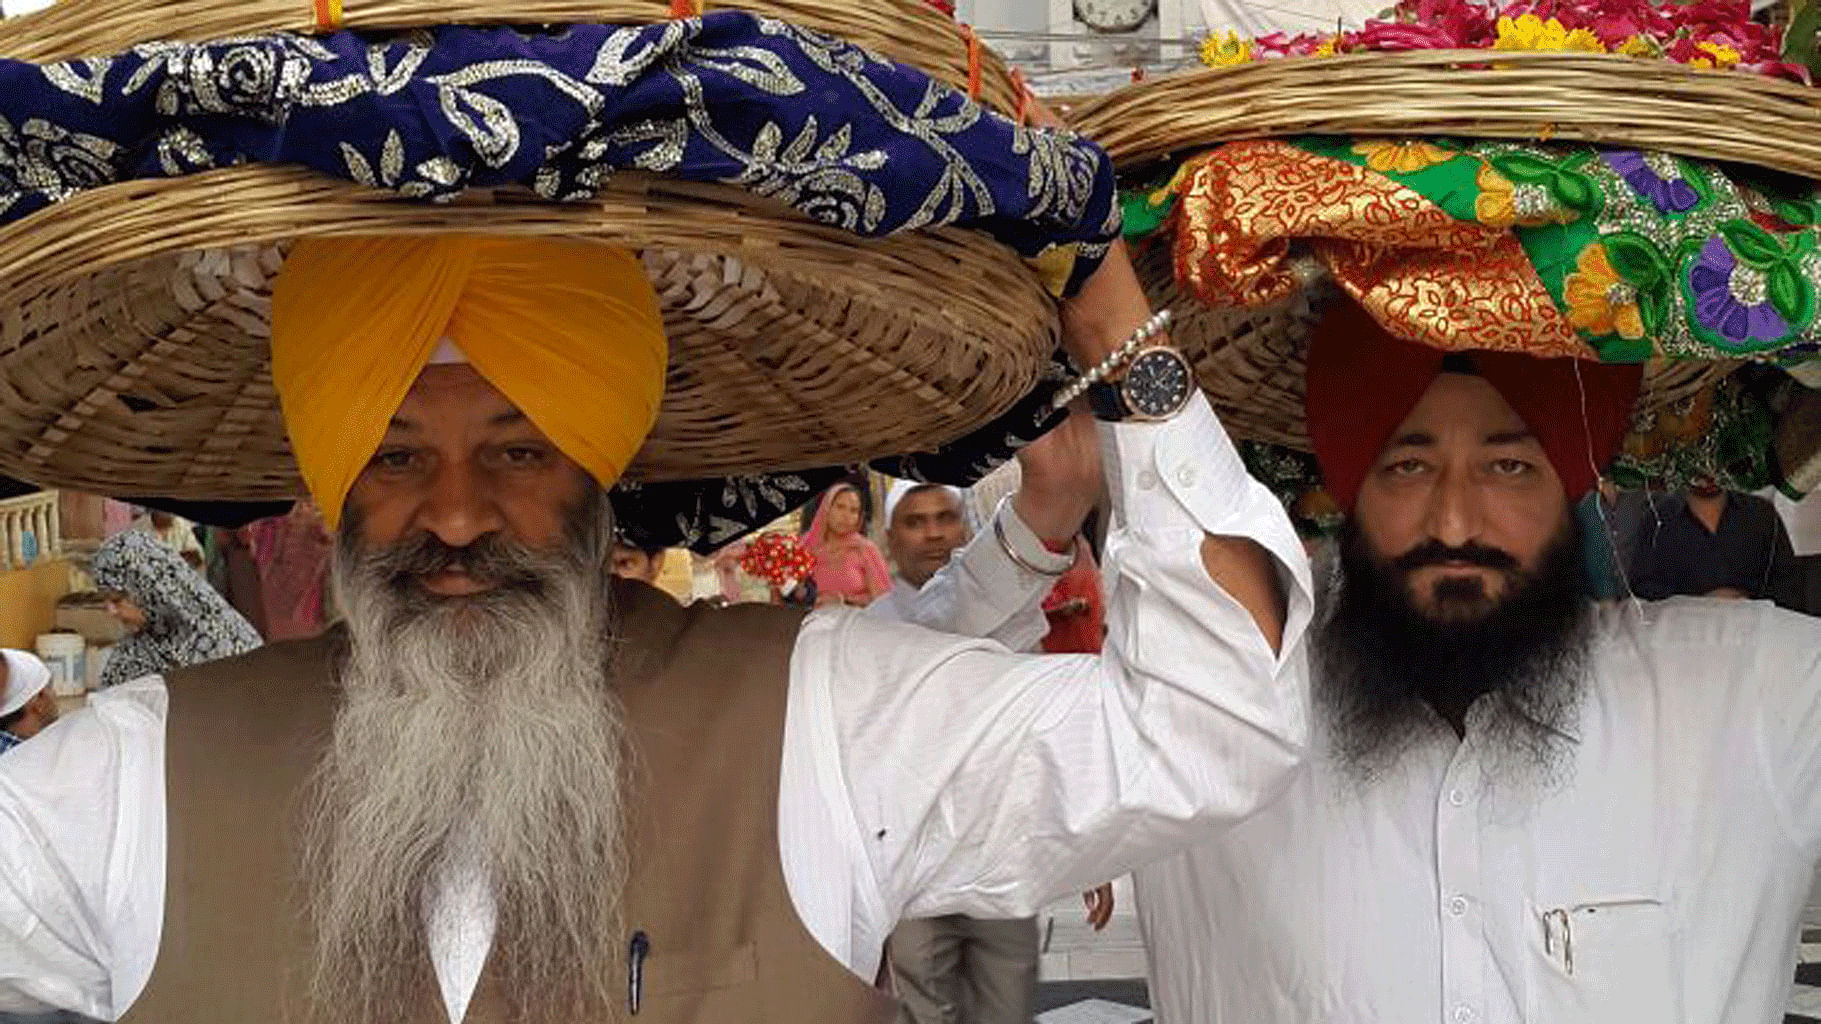 Gurdaspur SP Salwinder Singh (right) in the company of Sucha Singh Langah, a minister in the cabinet of Punjab Chief Minister Parkash Singh Badal, at a dargah. (Photo: Chandan Nandy)